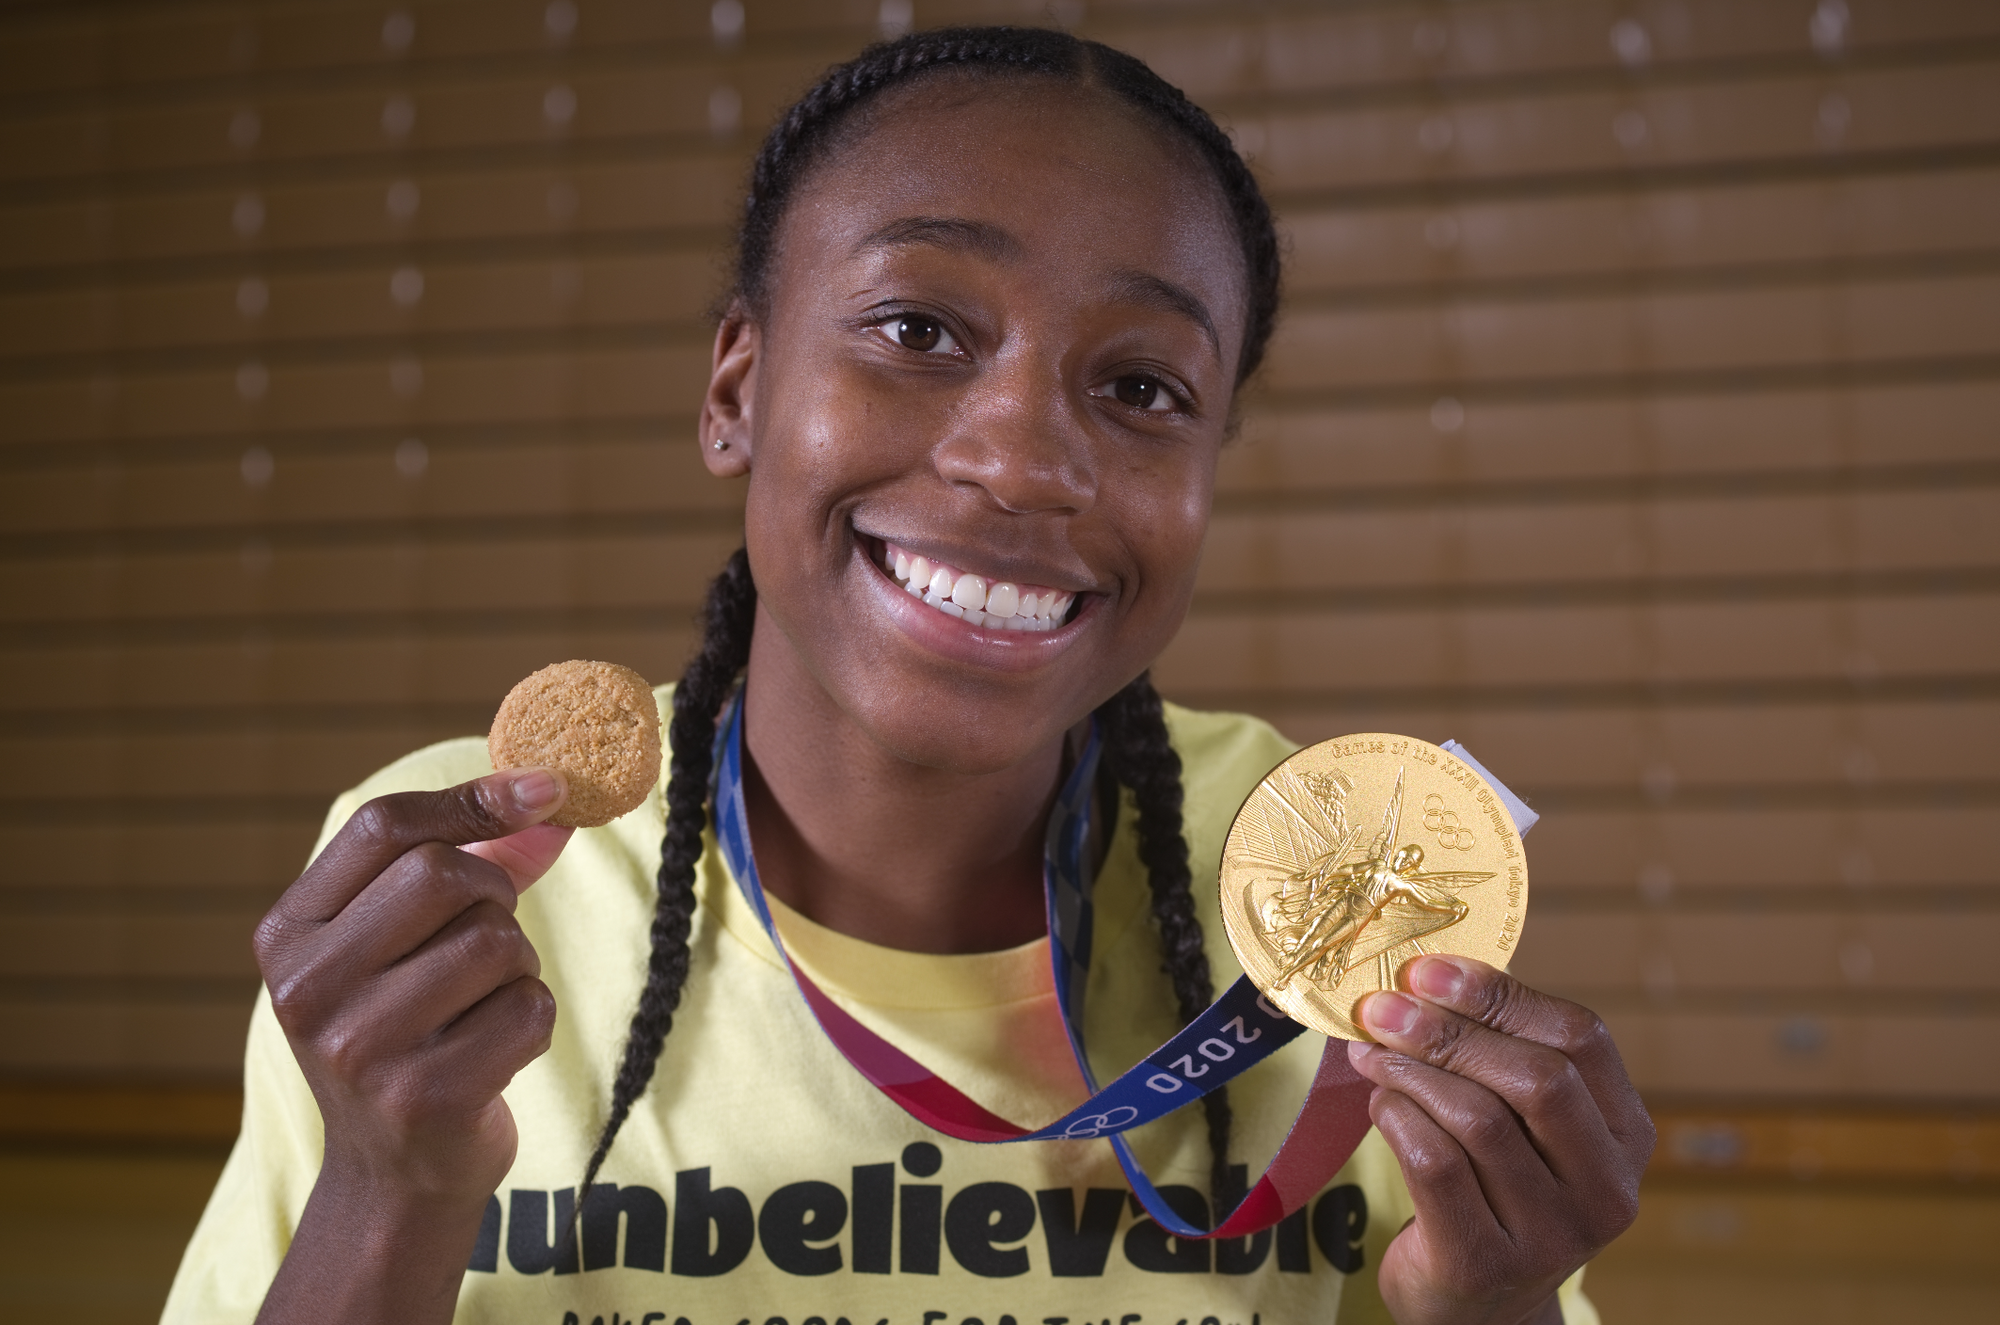 Basketball Superstar Jewell Loyd Wins Gold Medal and Keeps Up the Fight Against Hunger